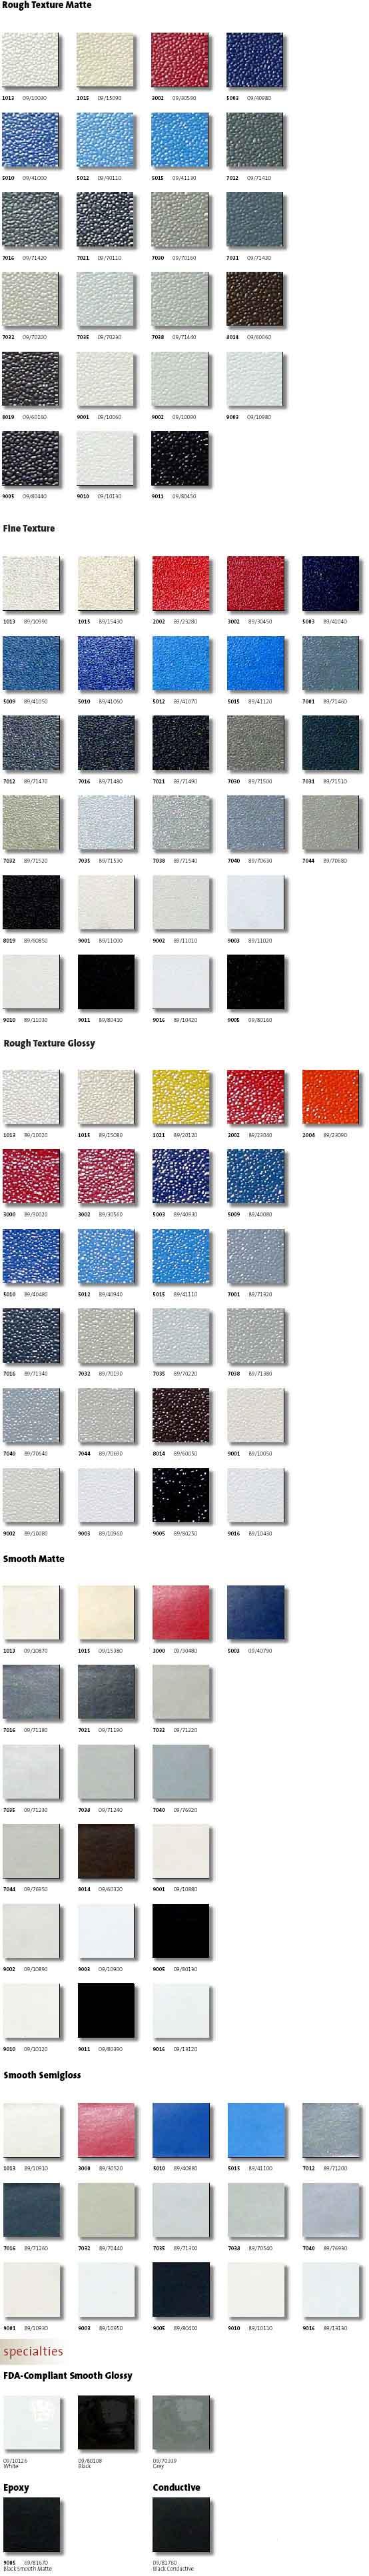 [Powder Coating Color - Interior Finishes/Textures]